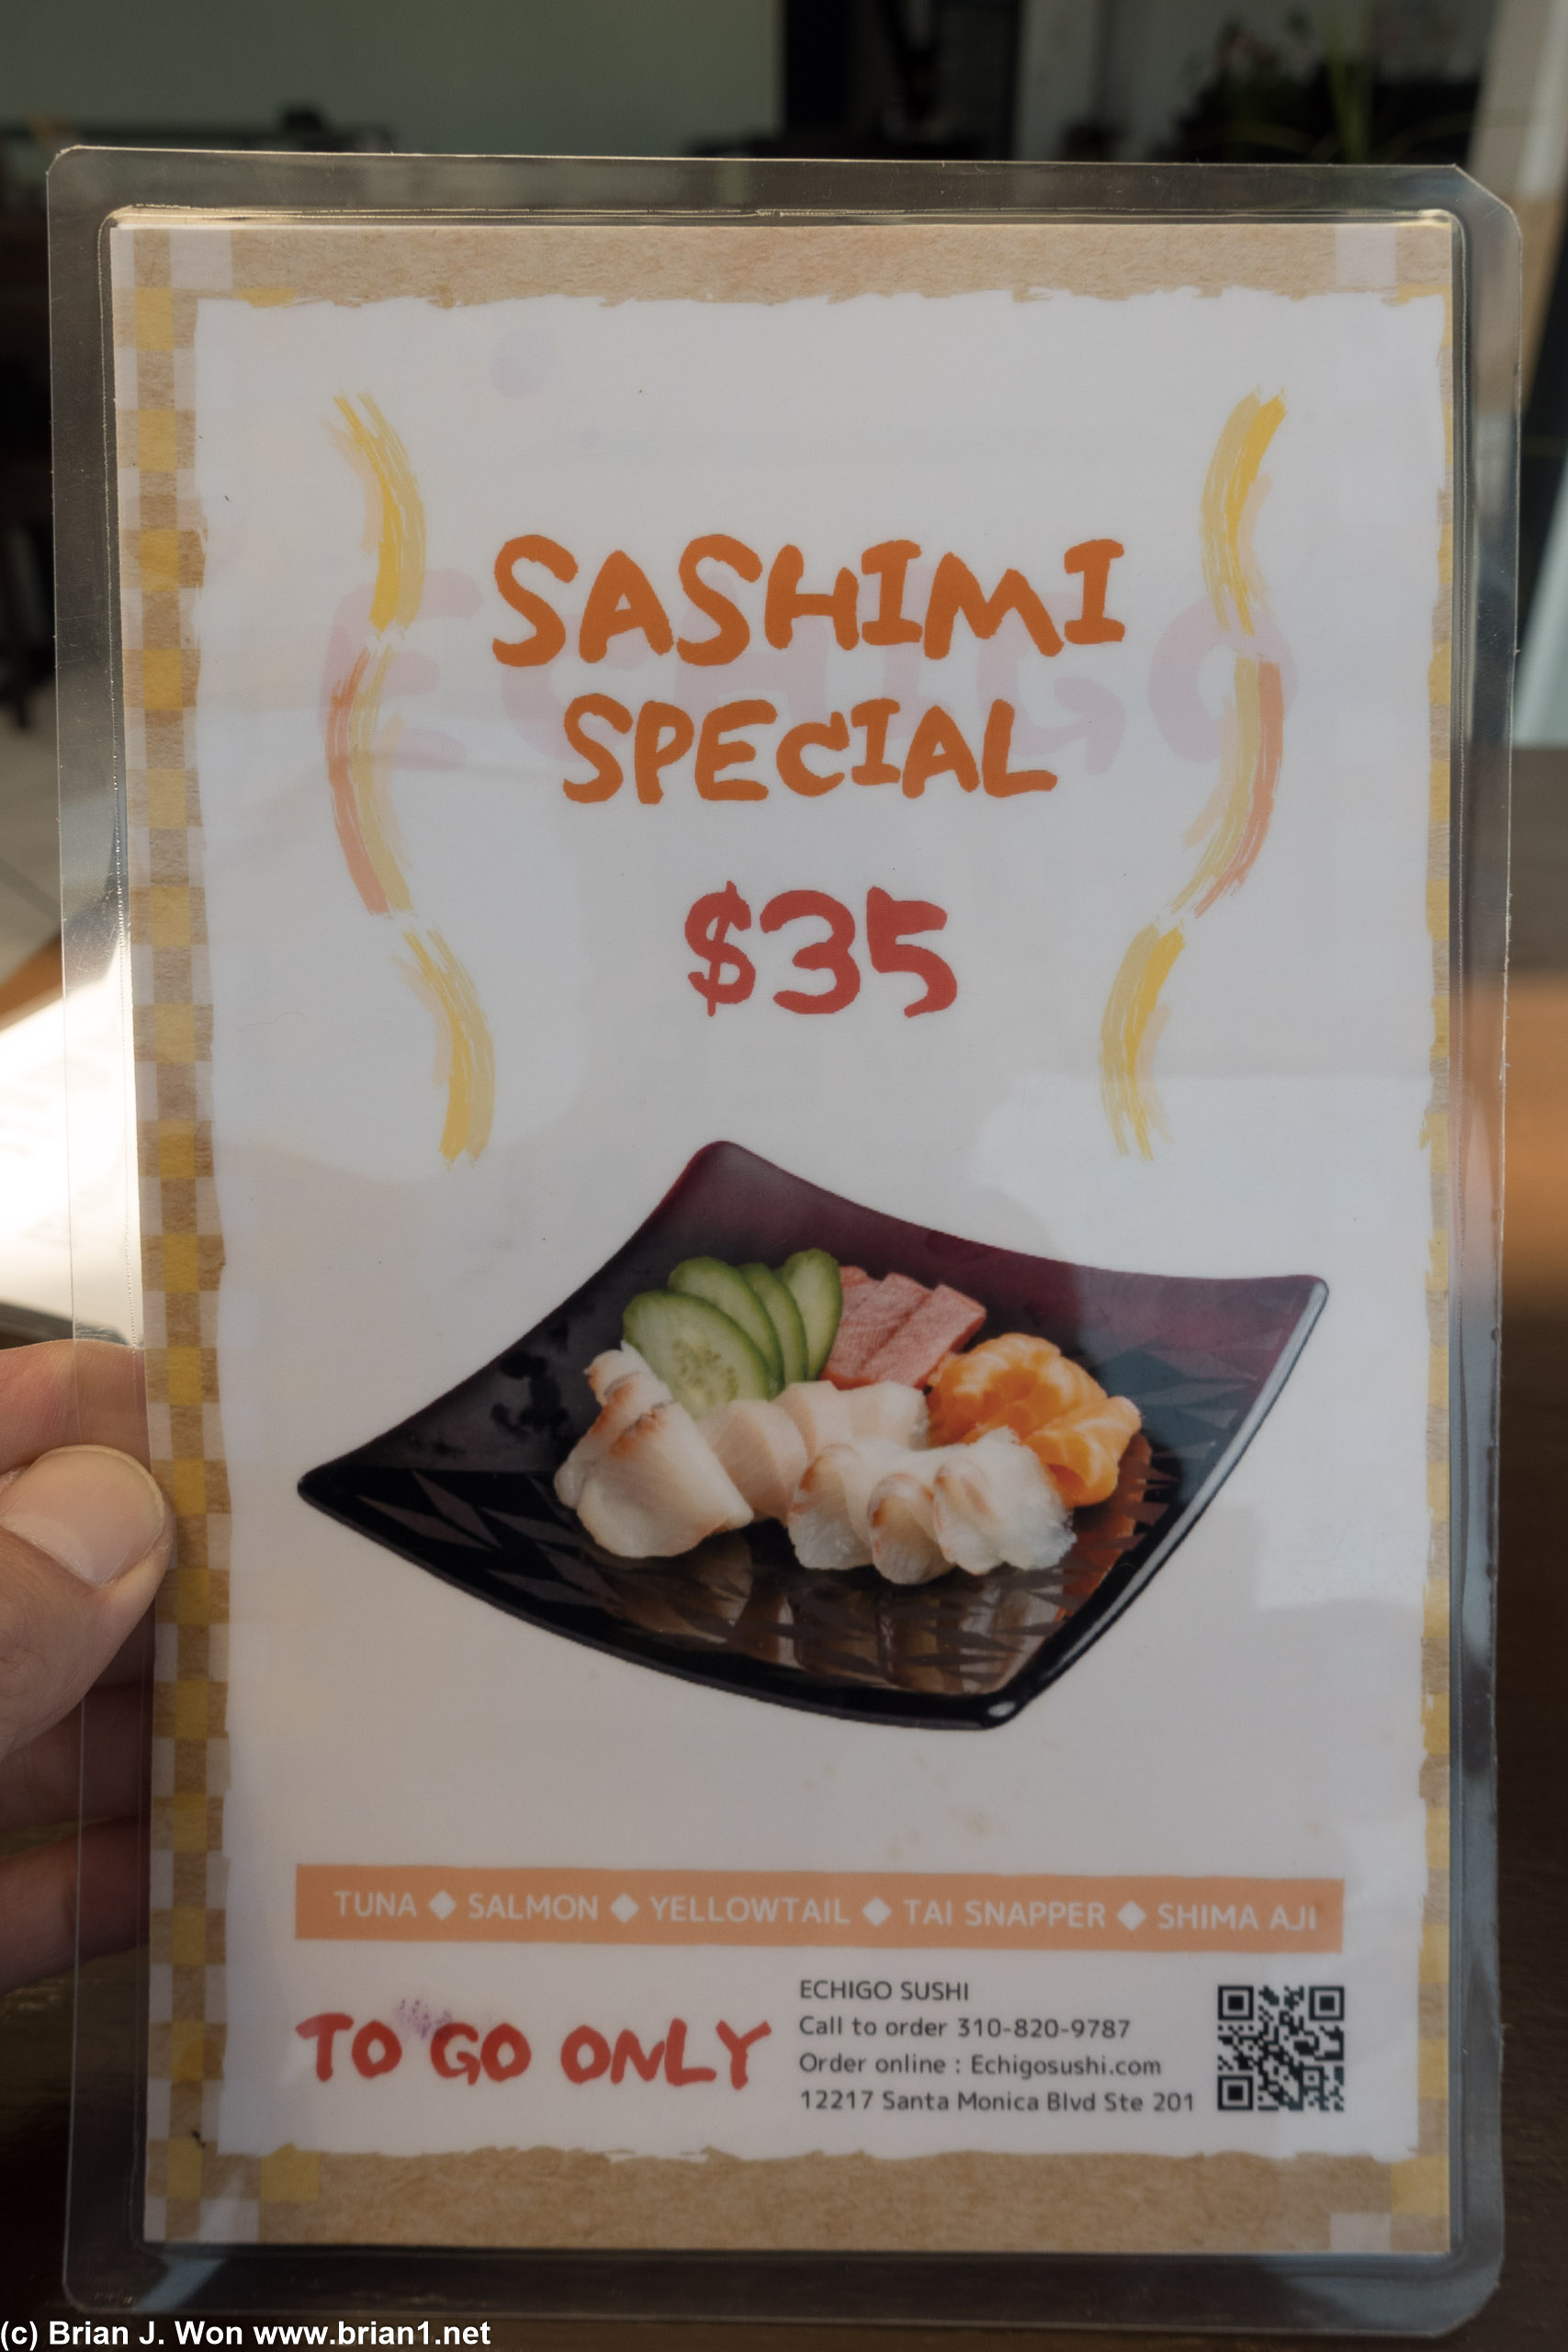 Sashimi special also to-go only.